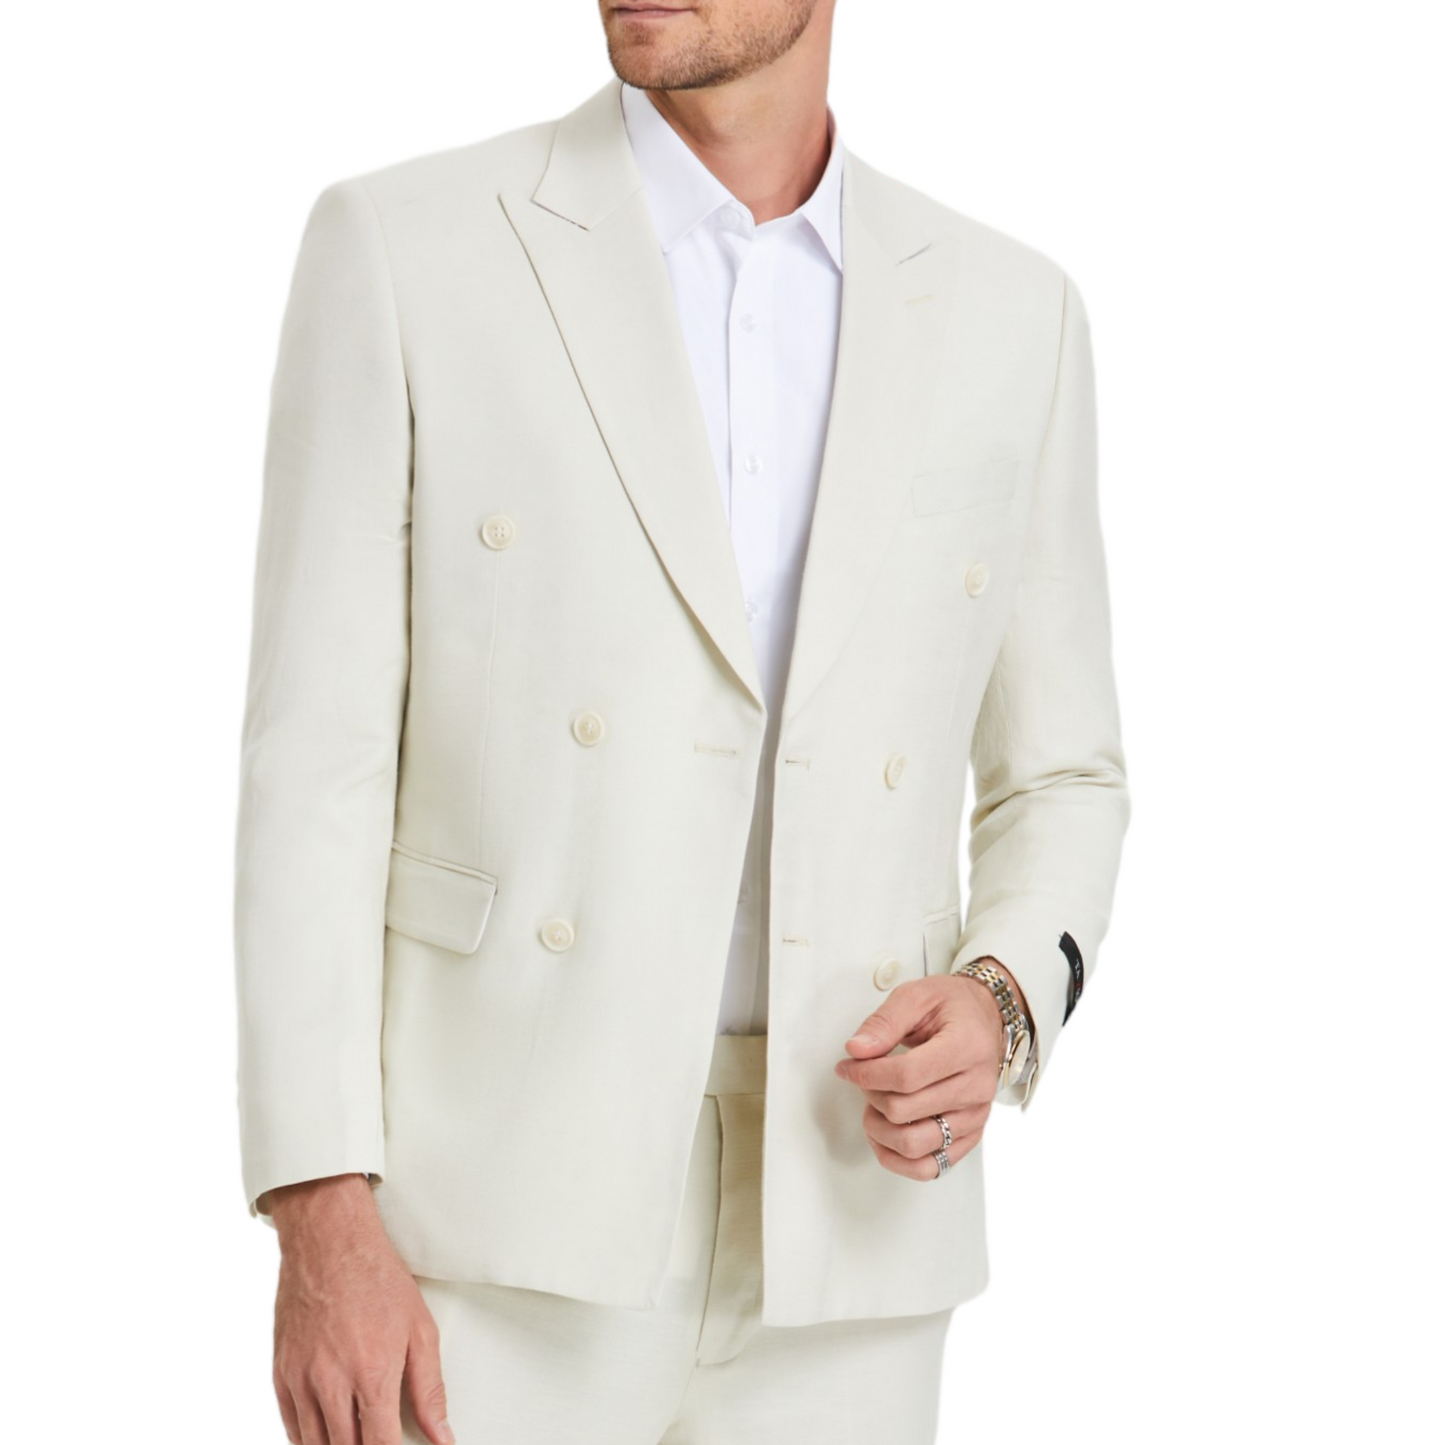 Sophisticated KCT Menswear Cream Double-Breasted Suit for a sharp and stylish summer ensemble